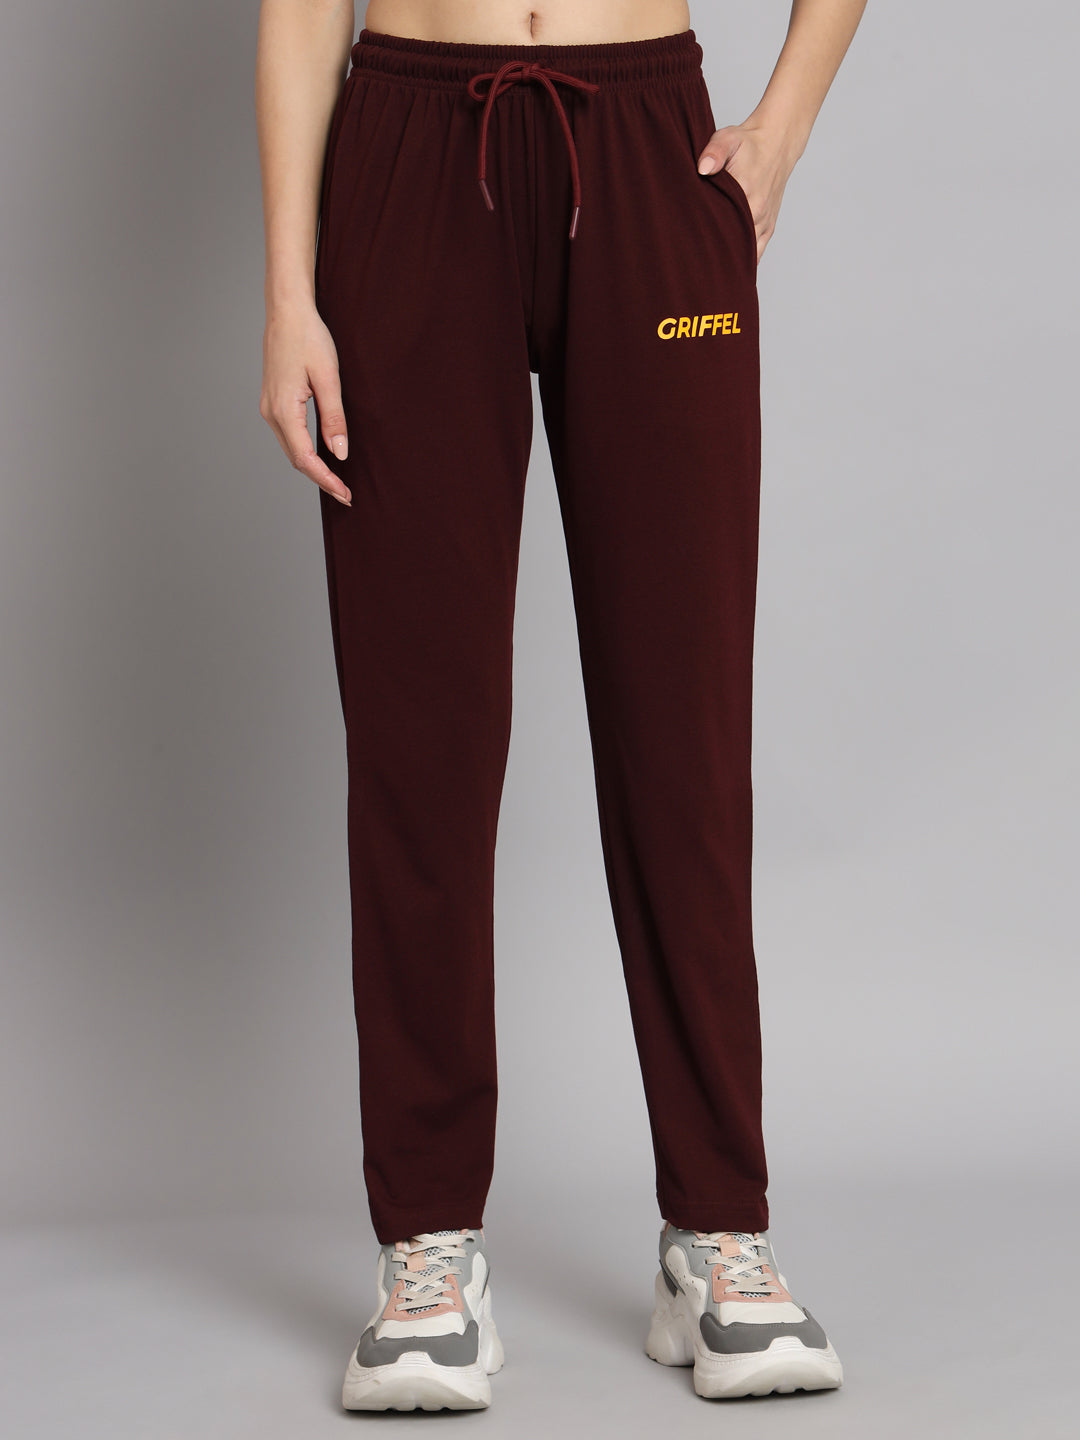 Griffel Women Solid Cotton Matty Basic Hoodie and Joggers Full set Maroon Tracksuit